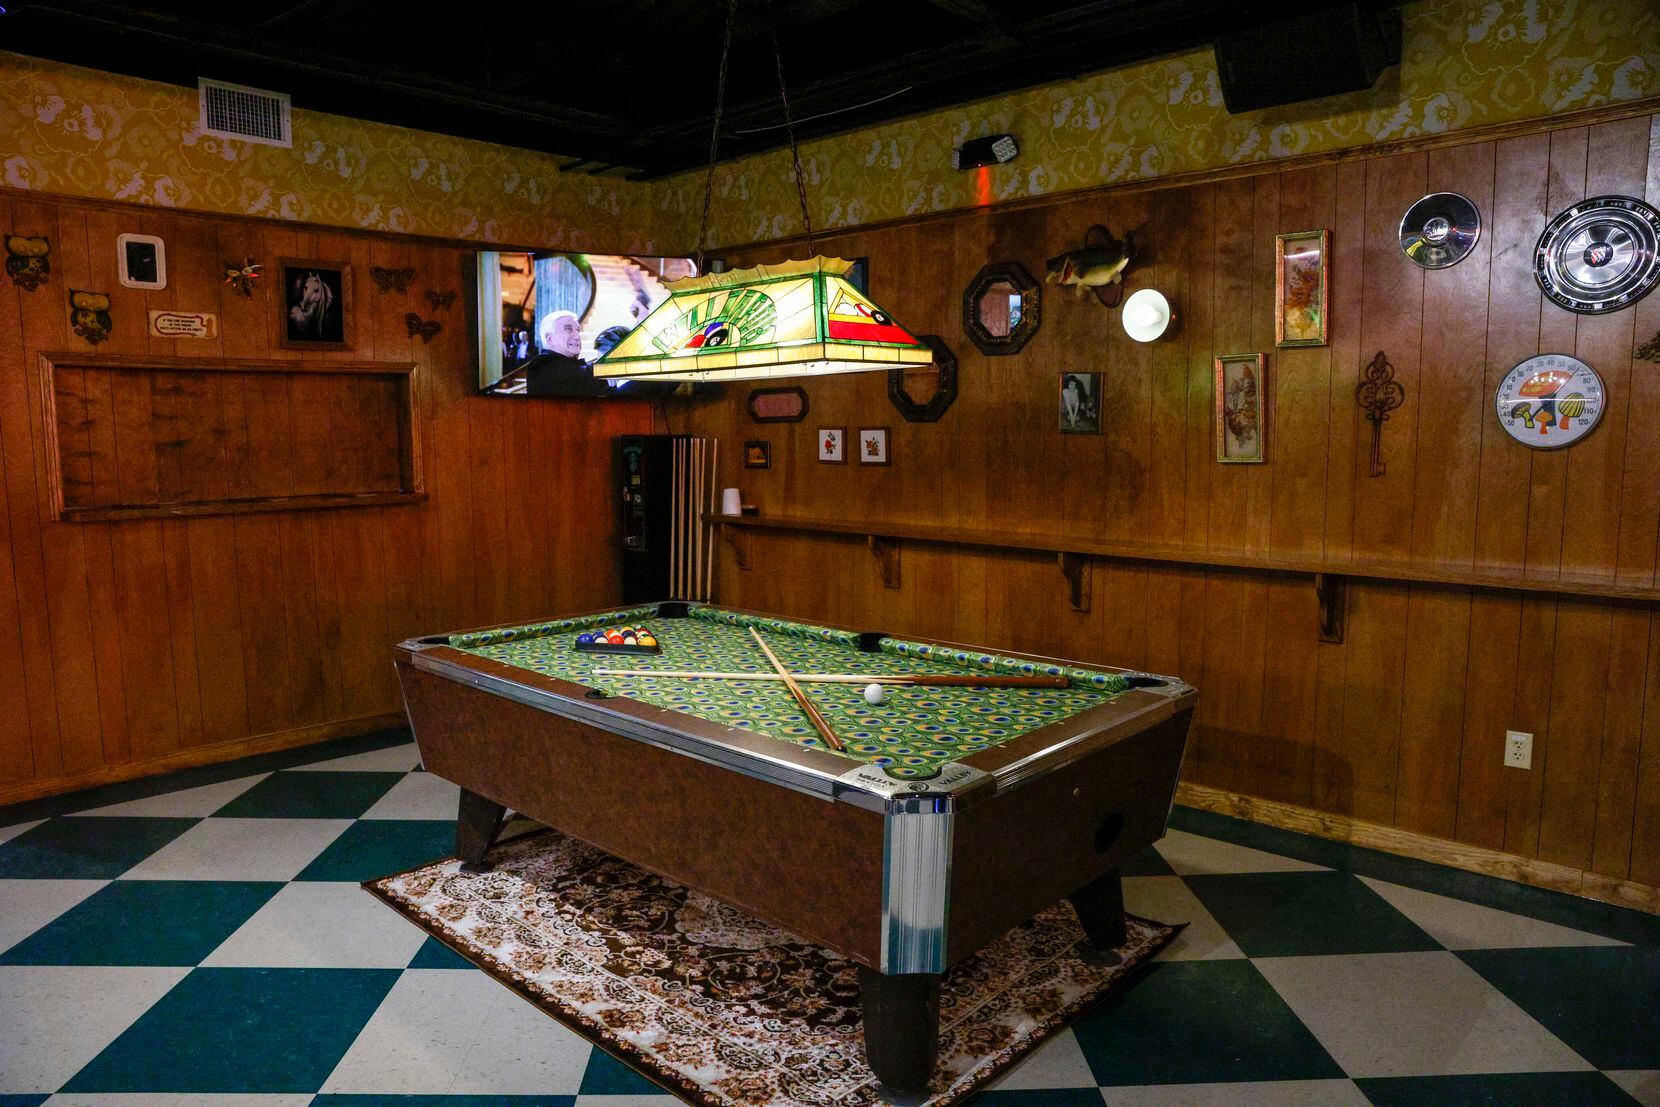 The pool table is made with peacock felt at Double D's in the Dallas Design District.